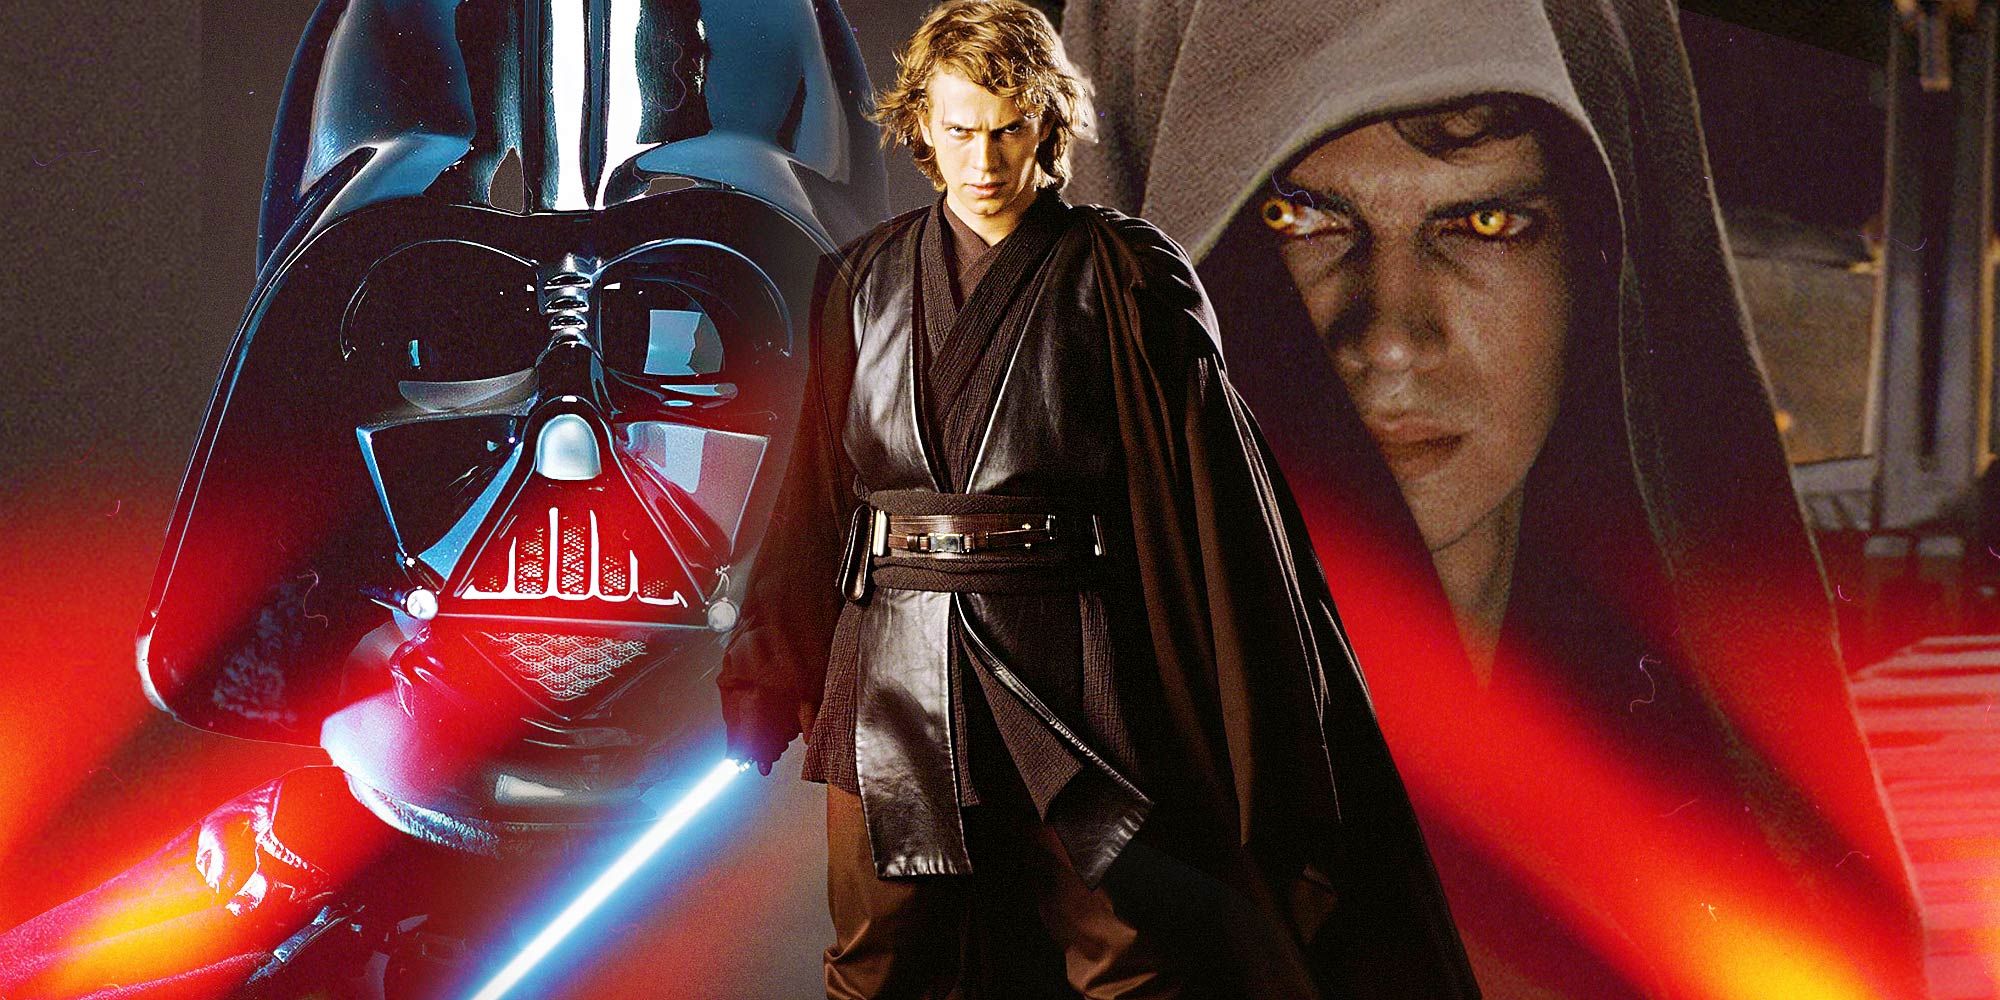 hayden-christensen-explains-why-attack-of-the-clones’-tusken-massacre-was-so-important-–-&-yet-so-difficult-to-film